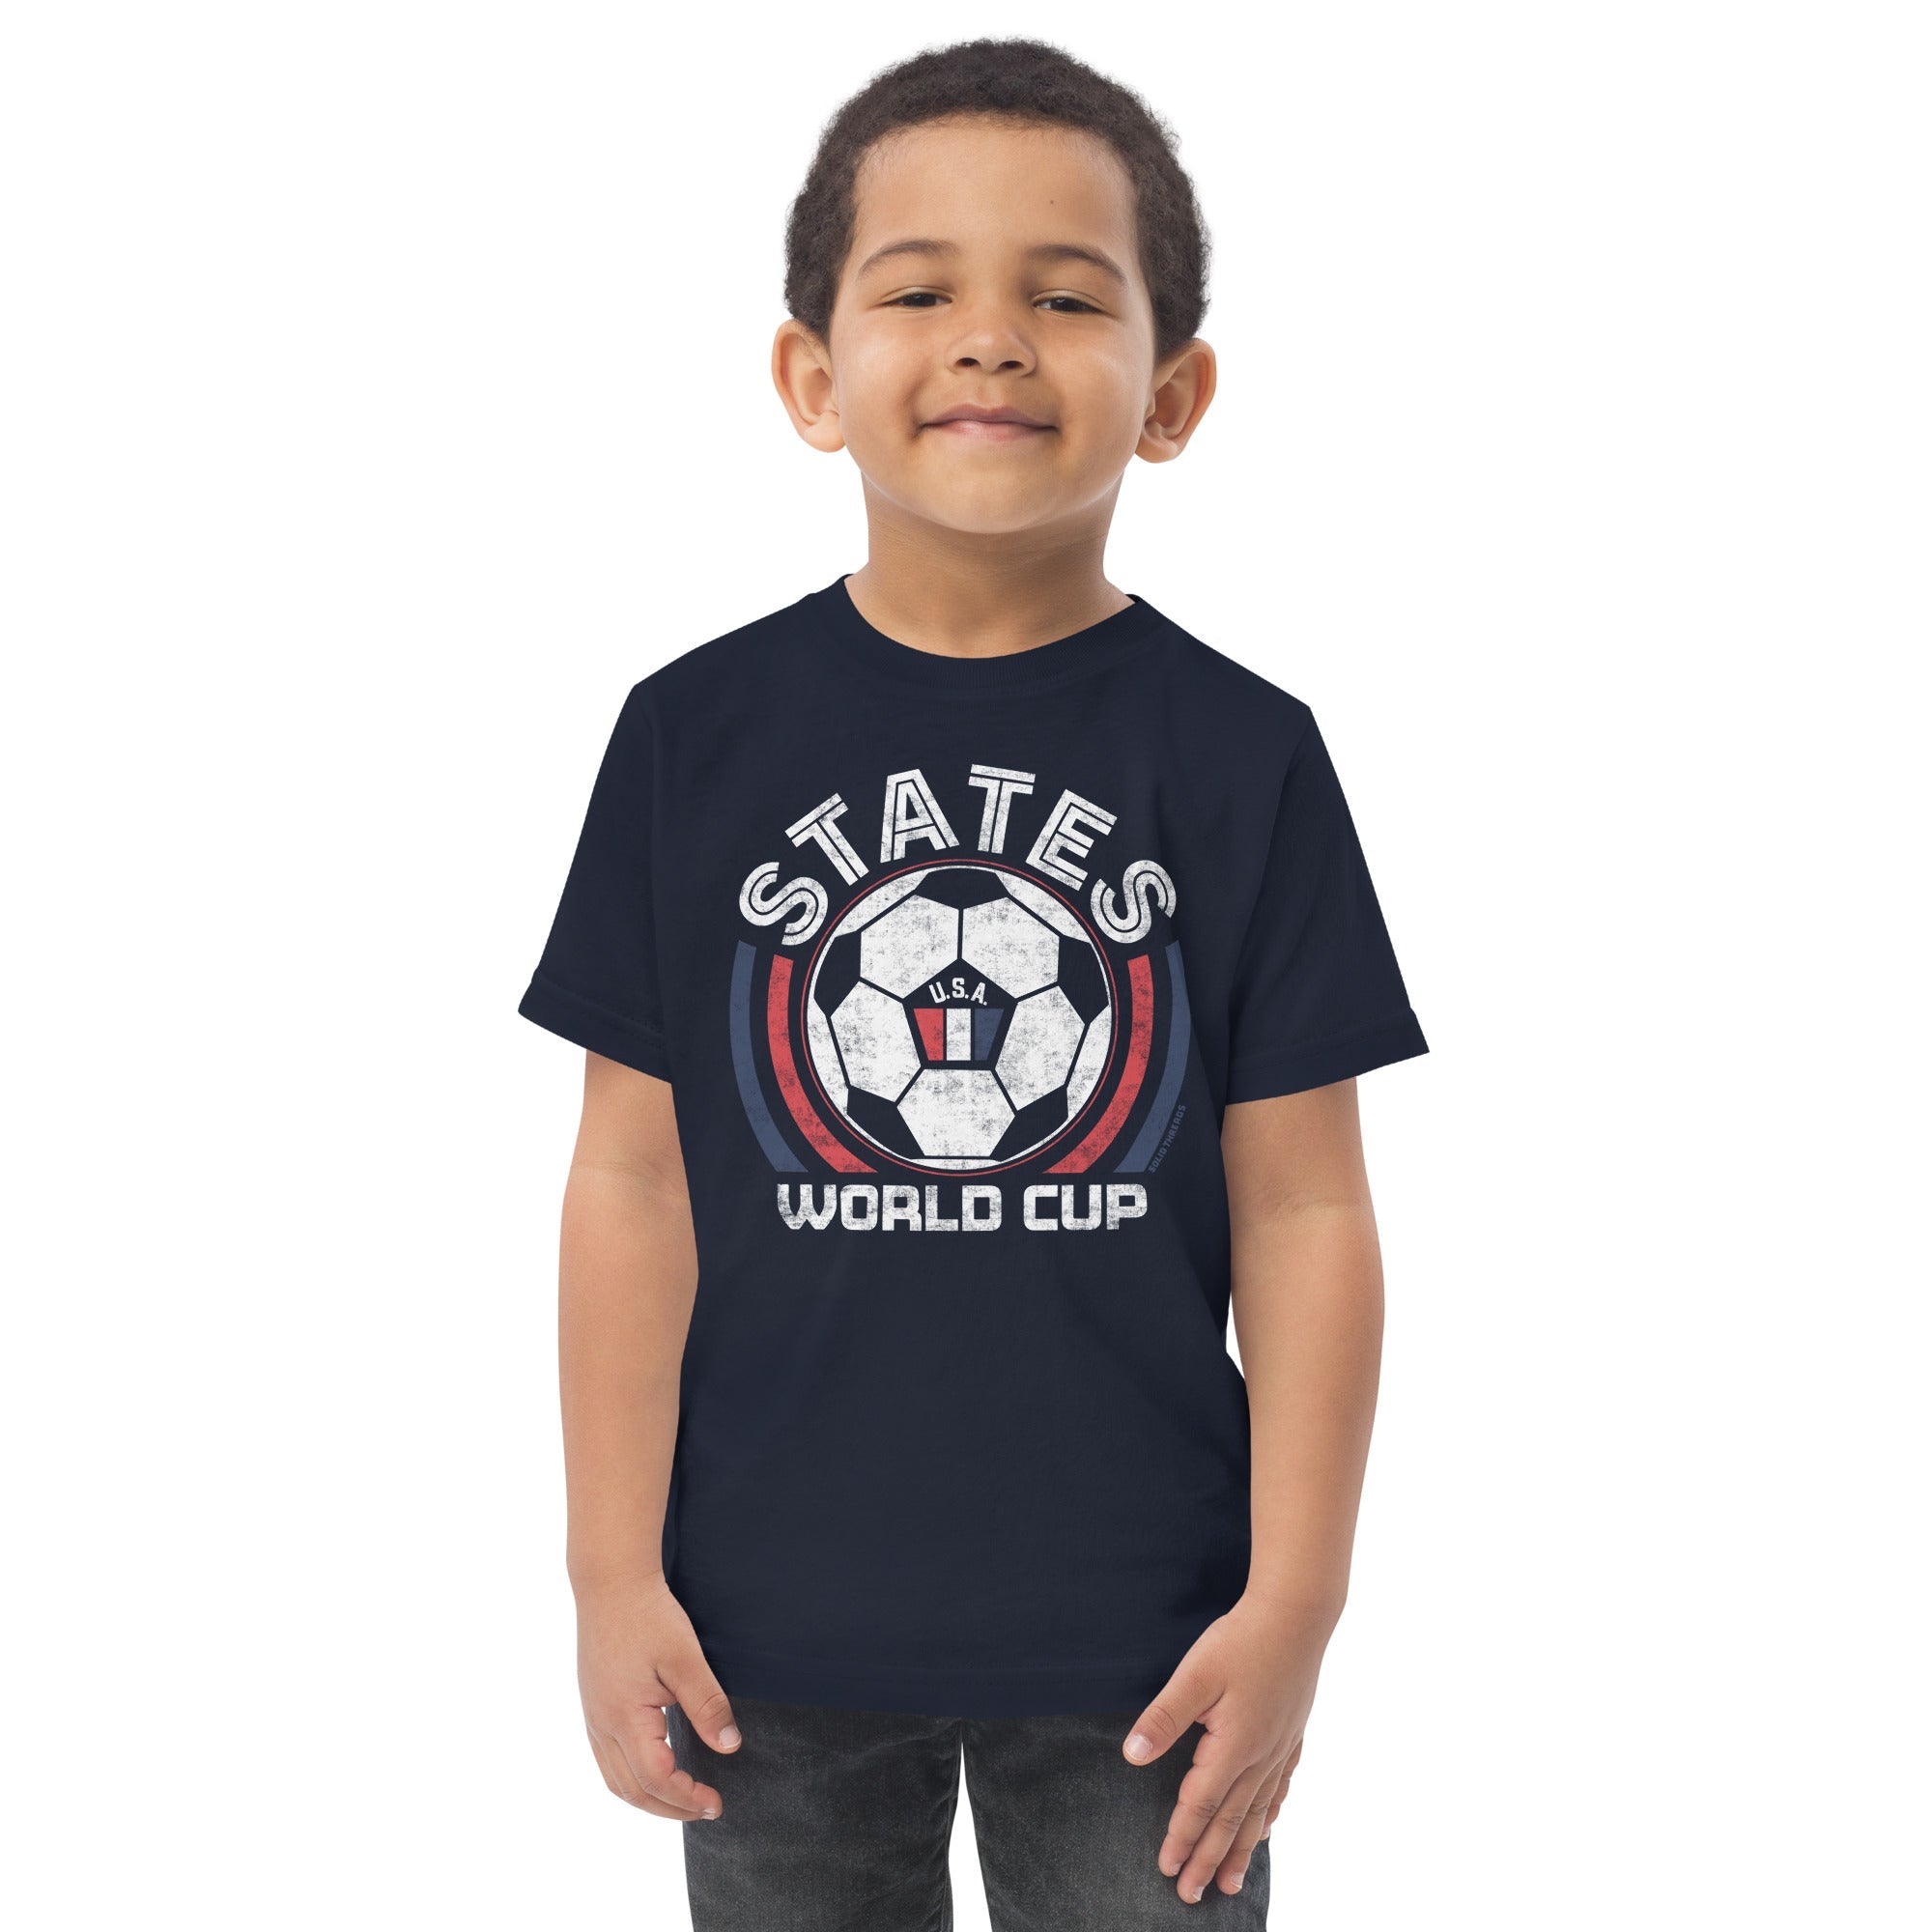 Toddler's US Soccer Team Cool Extra Soft T-Shirt | Retro FIFA World Cup Tee On Model | Solid Threads